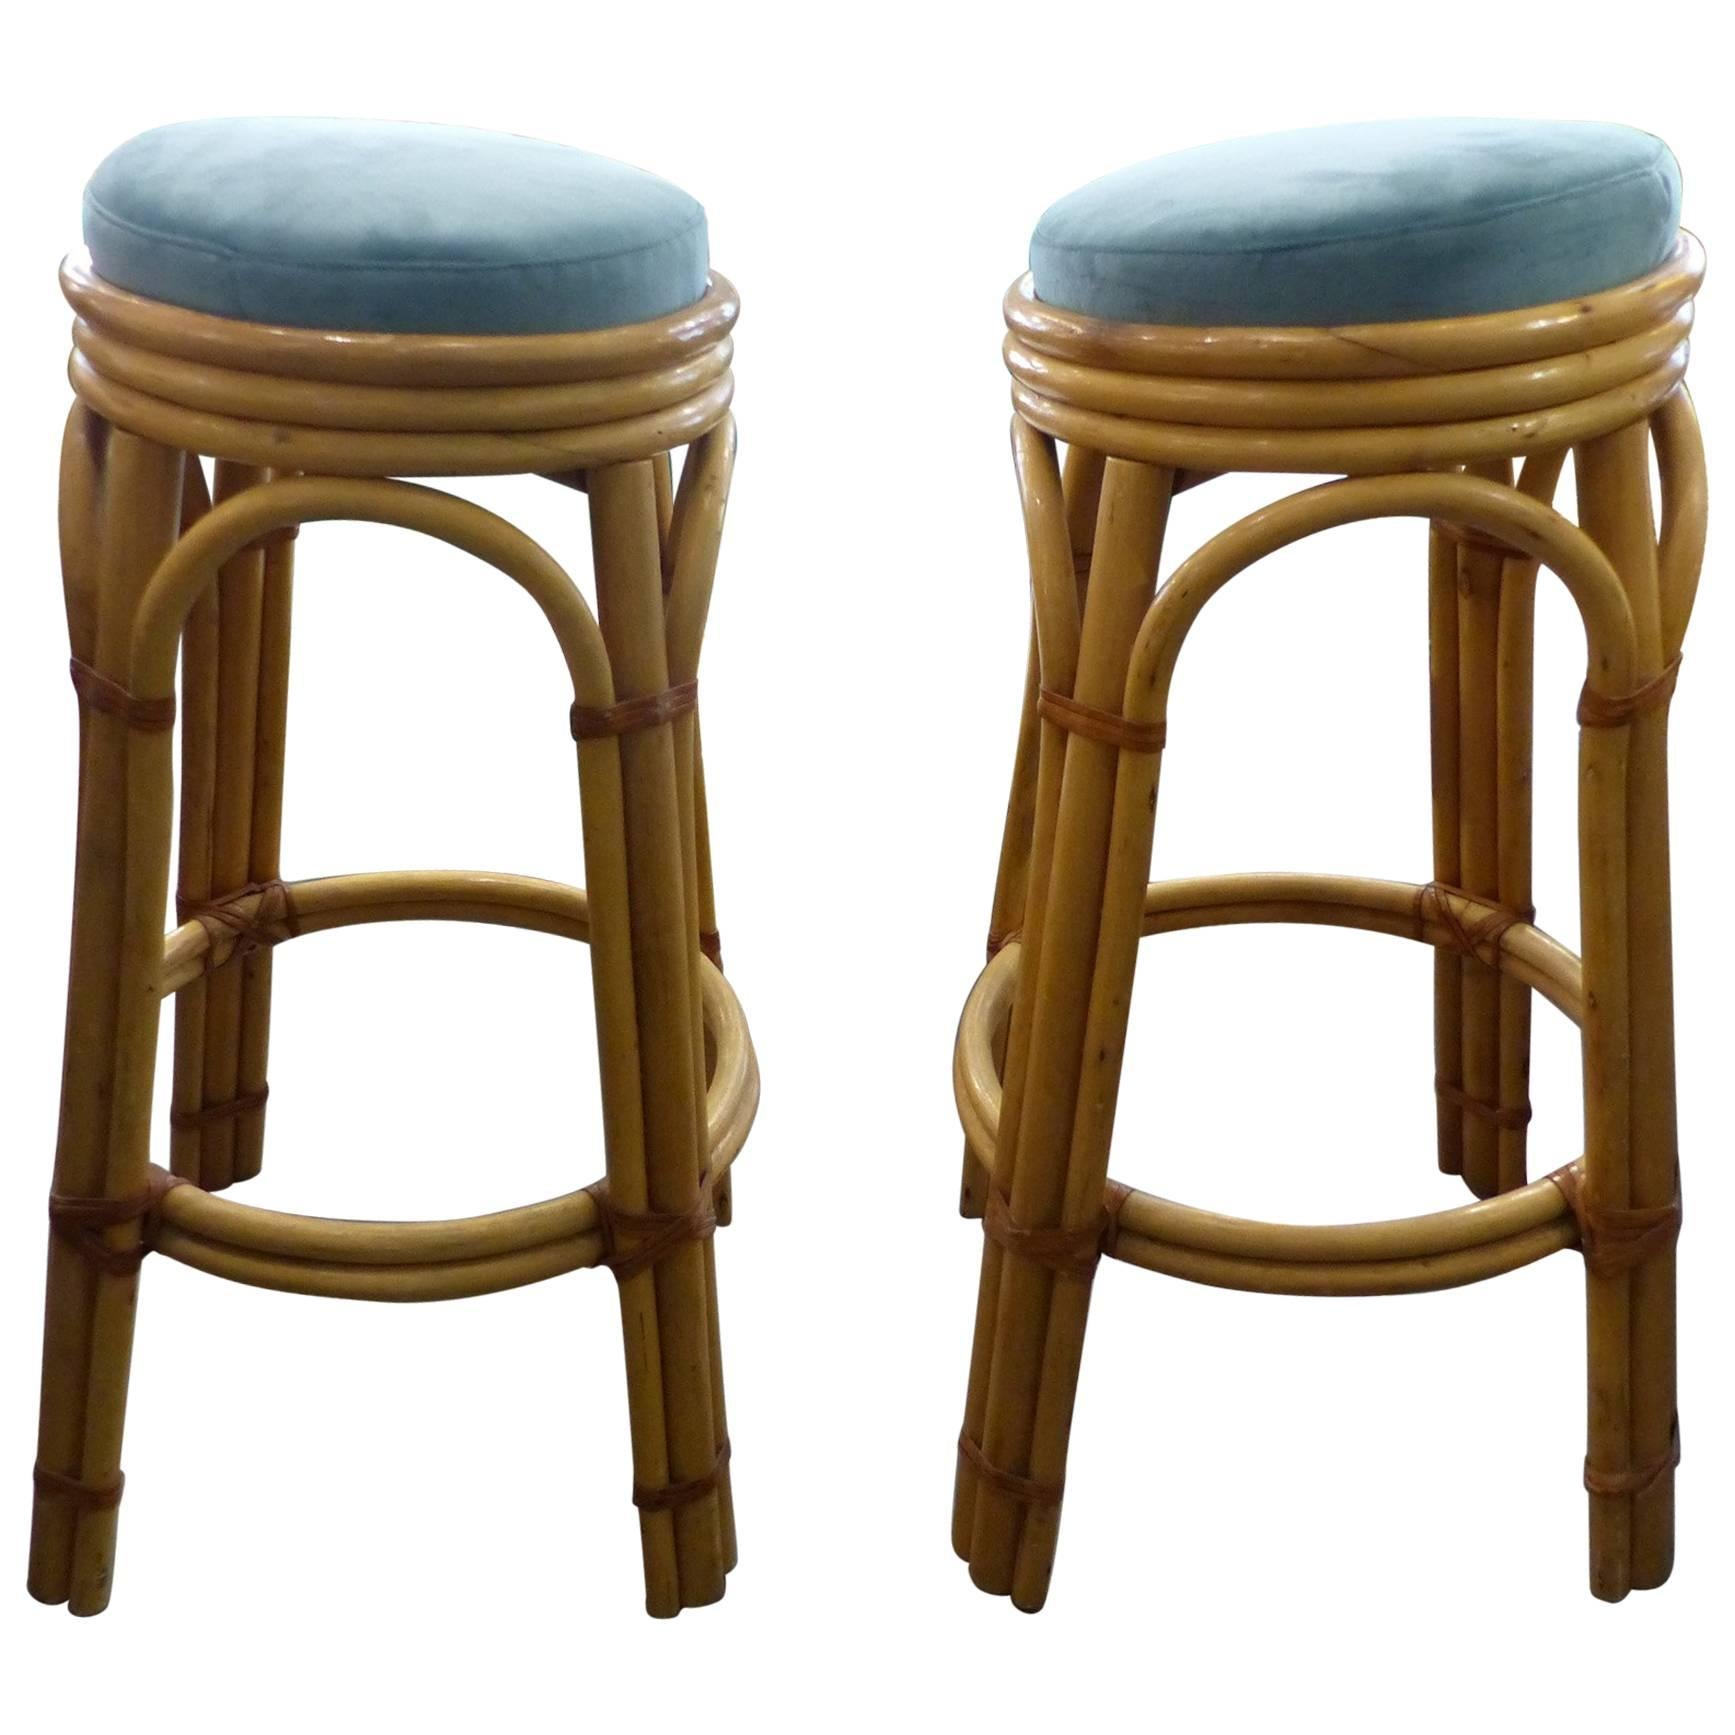 Beautiful Pair of Reupholstered Wicker Bar Stools, circa 1960 For Sale